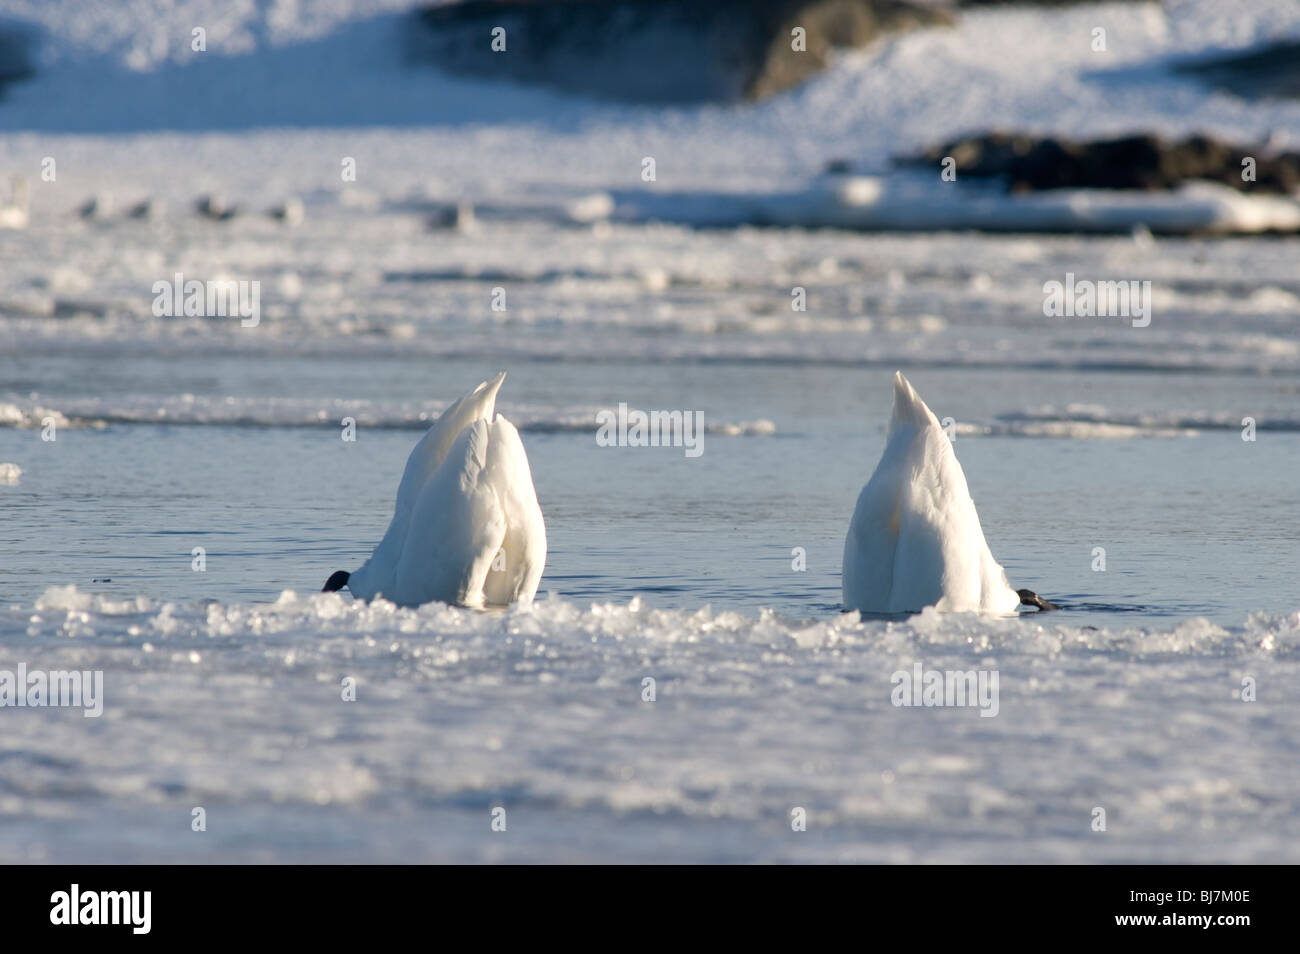 Swans in winter time, Sweden Stock Photo